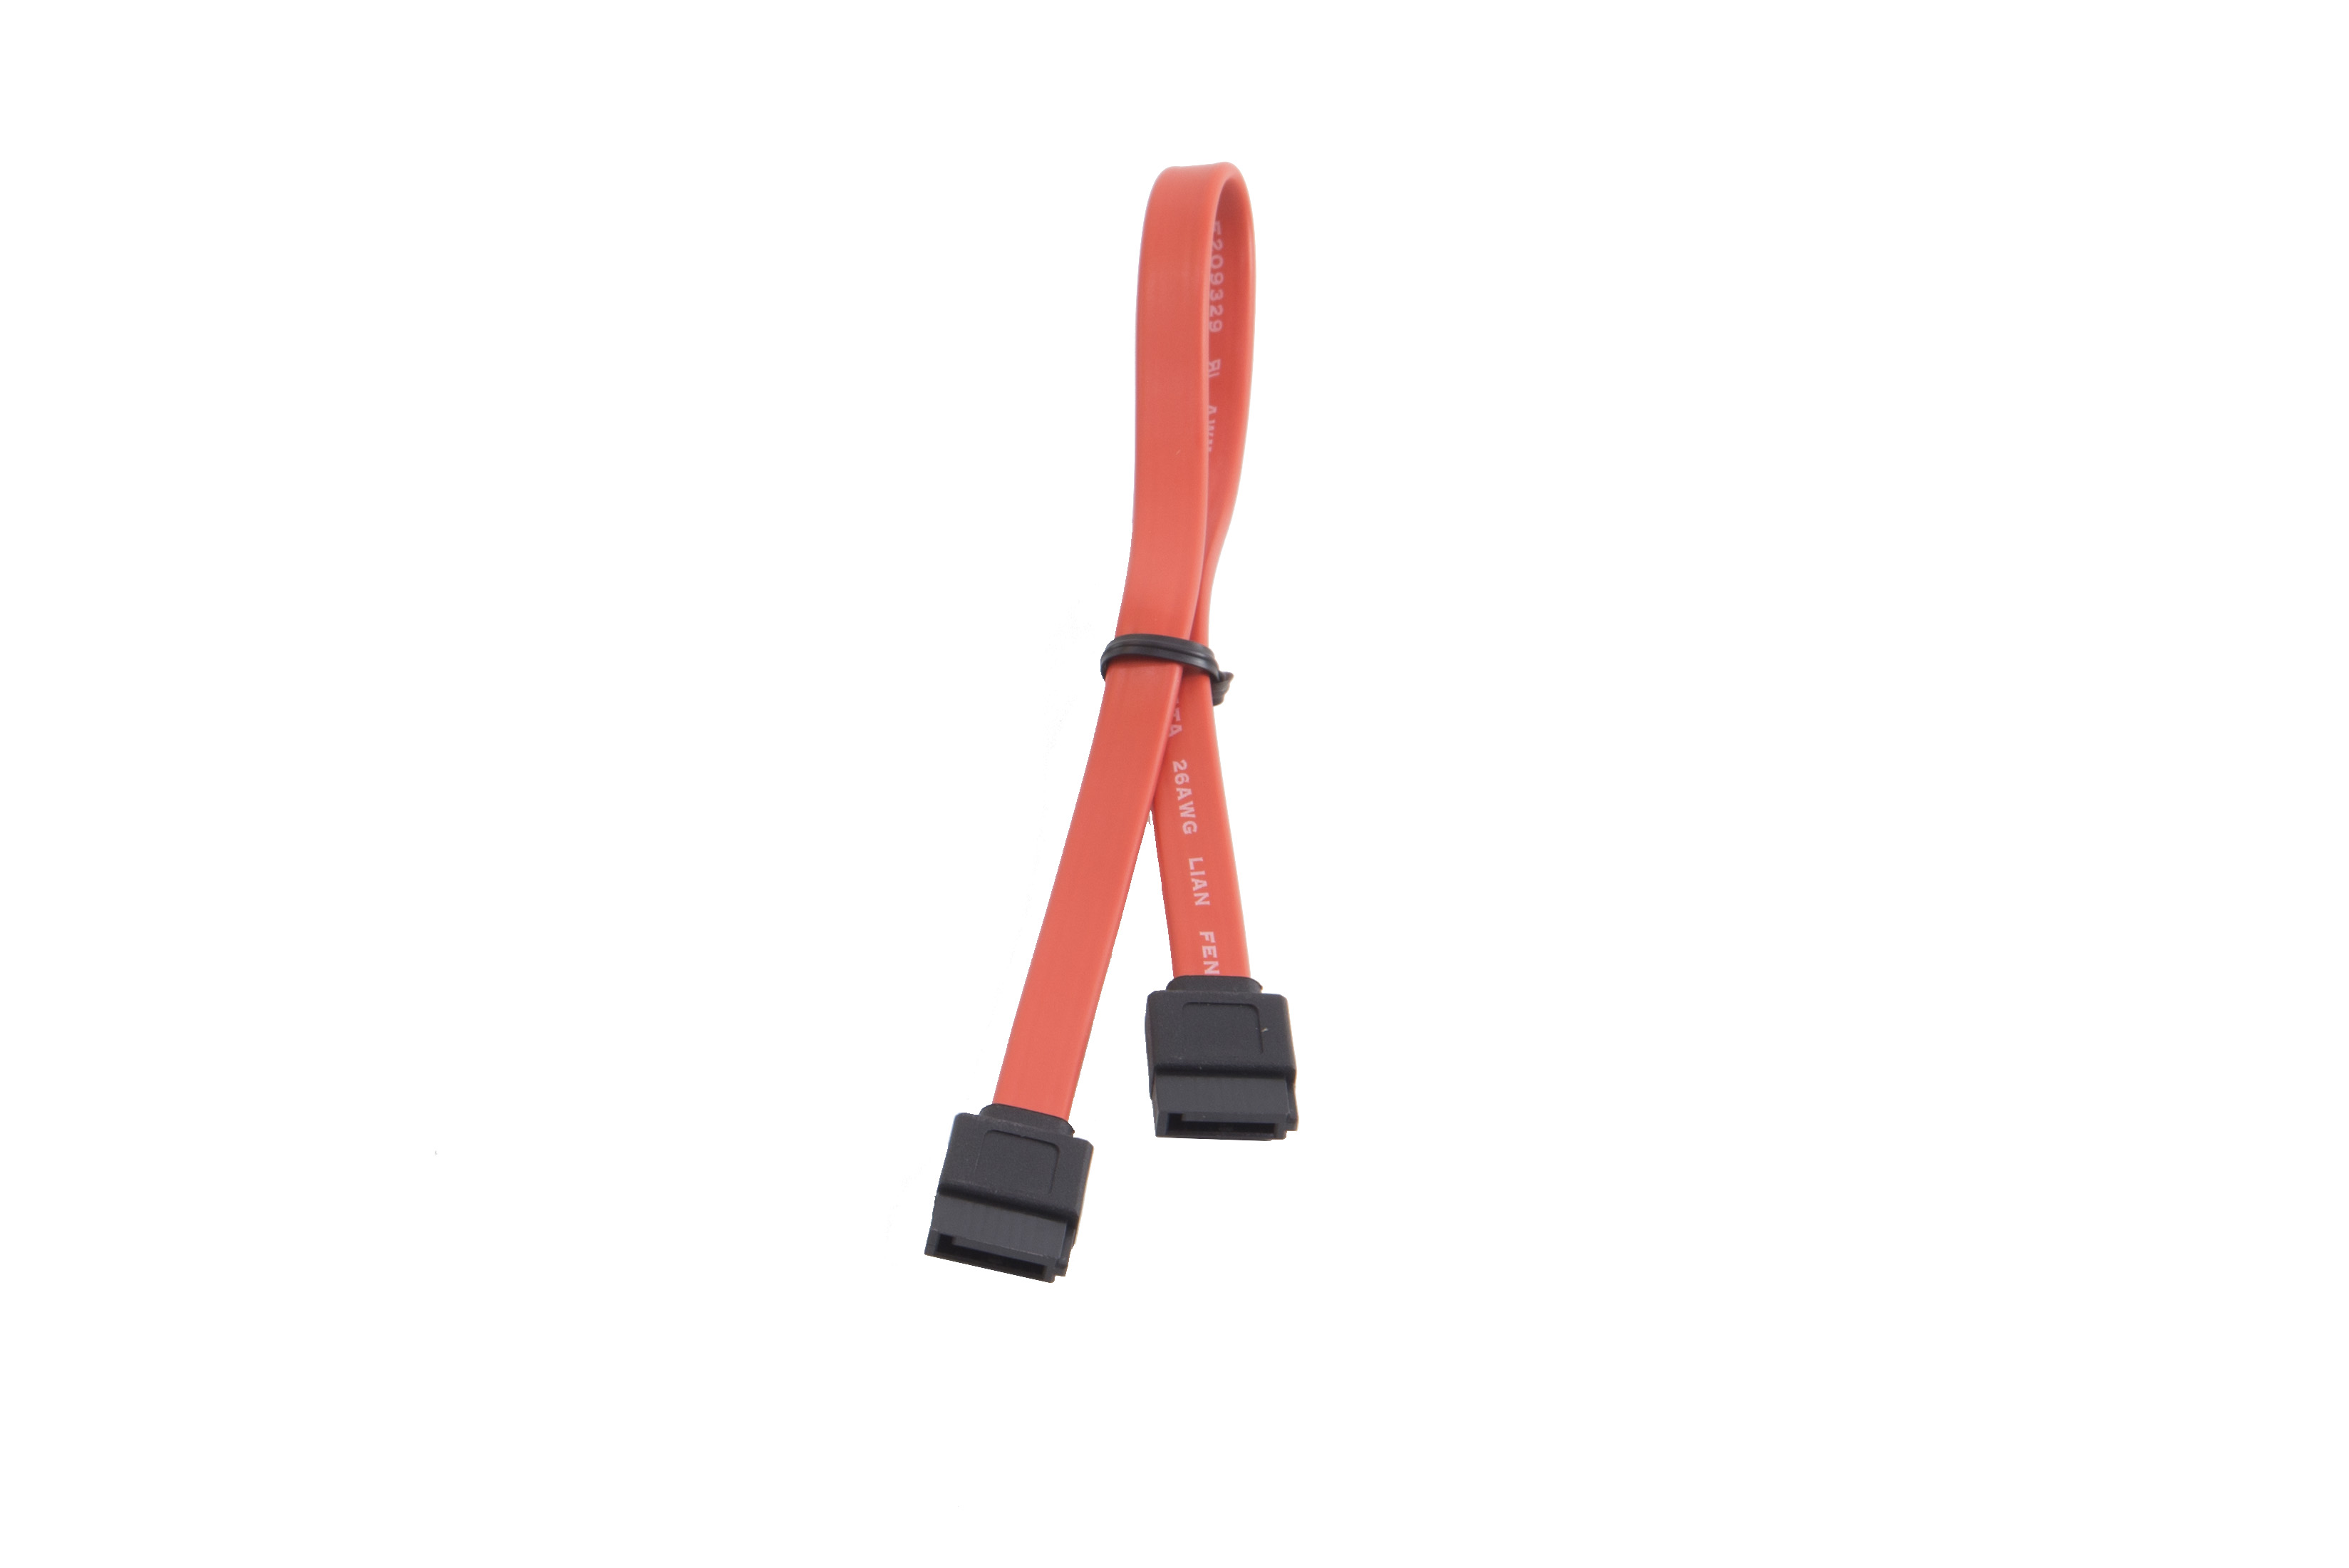 SATA CABLE 180-180  |Products|Accessories|Cable & Cord